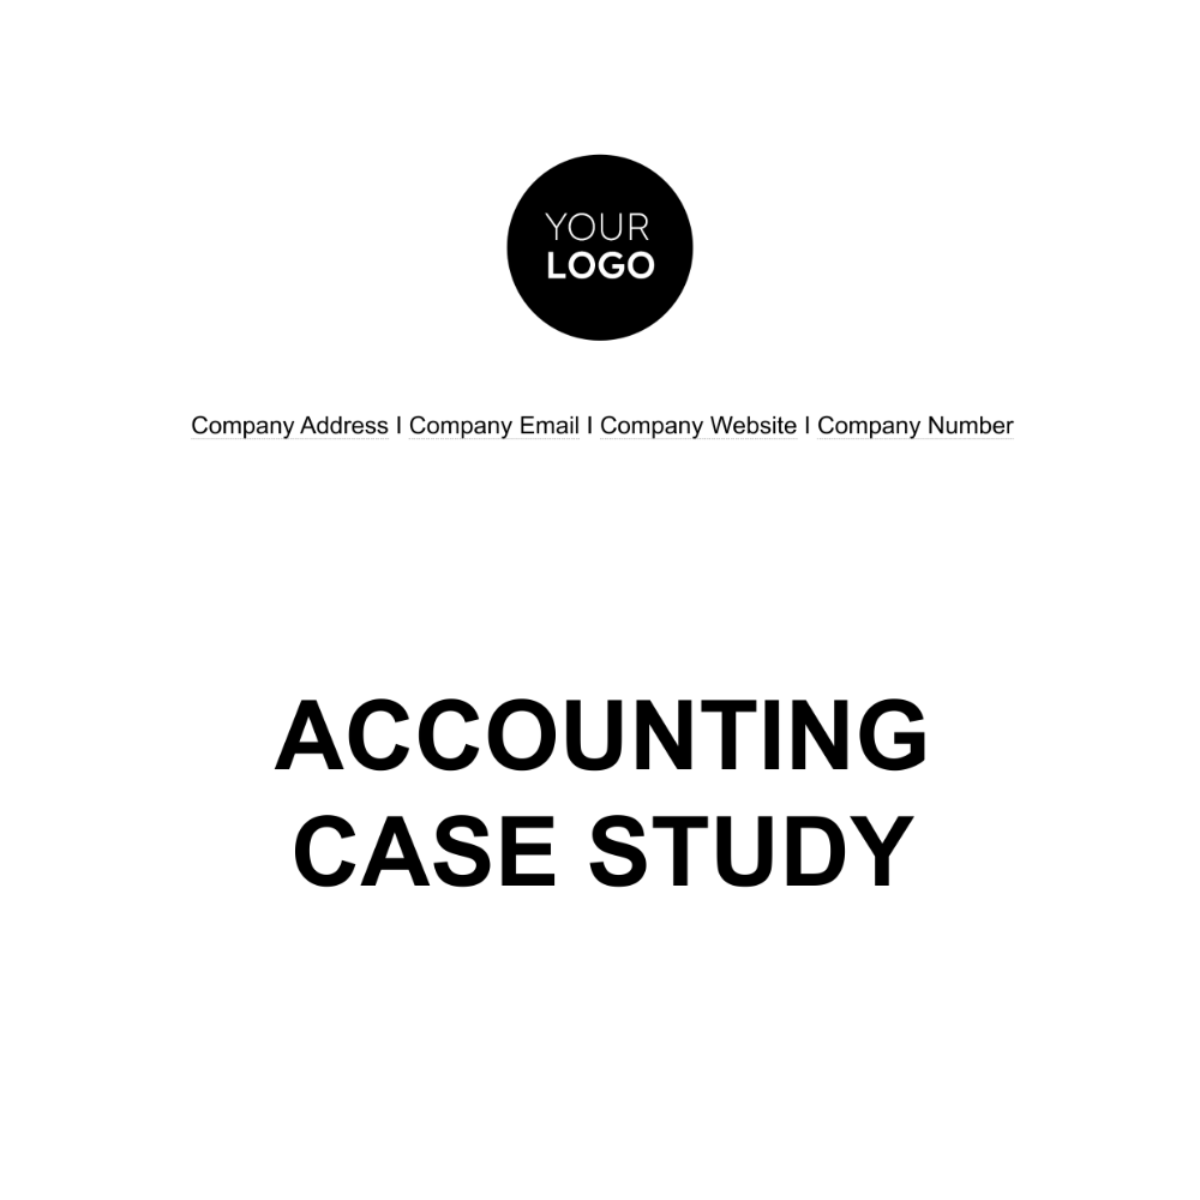 Accounting Case Study Template